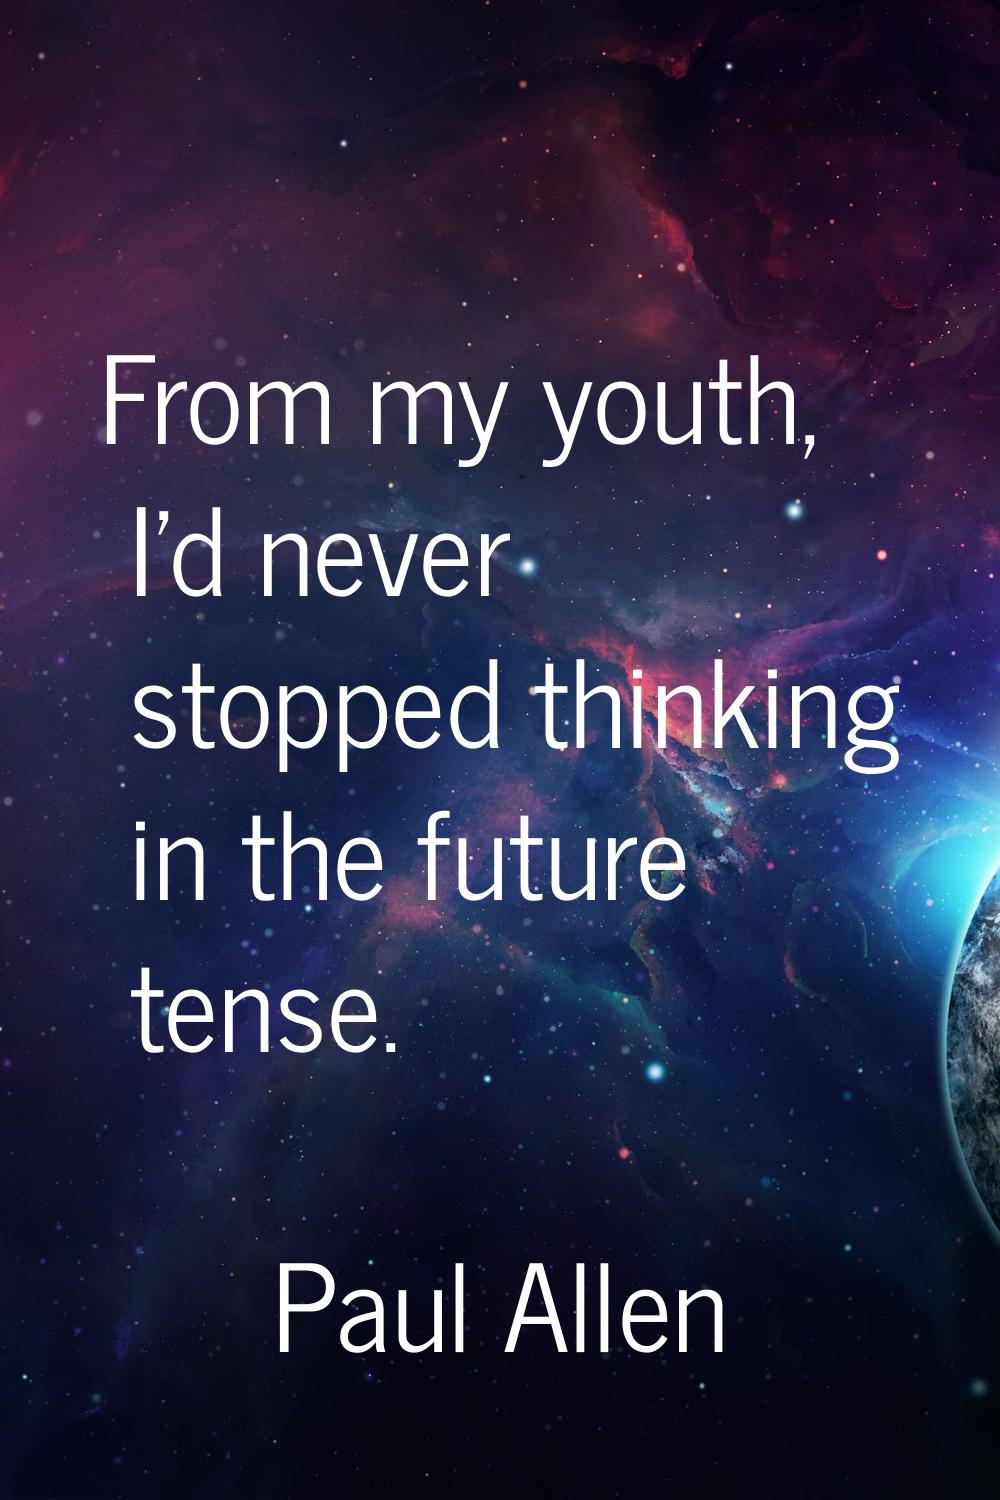 From my youth, I'd never stopped thinking in the future tense.